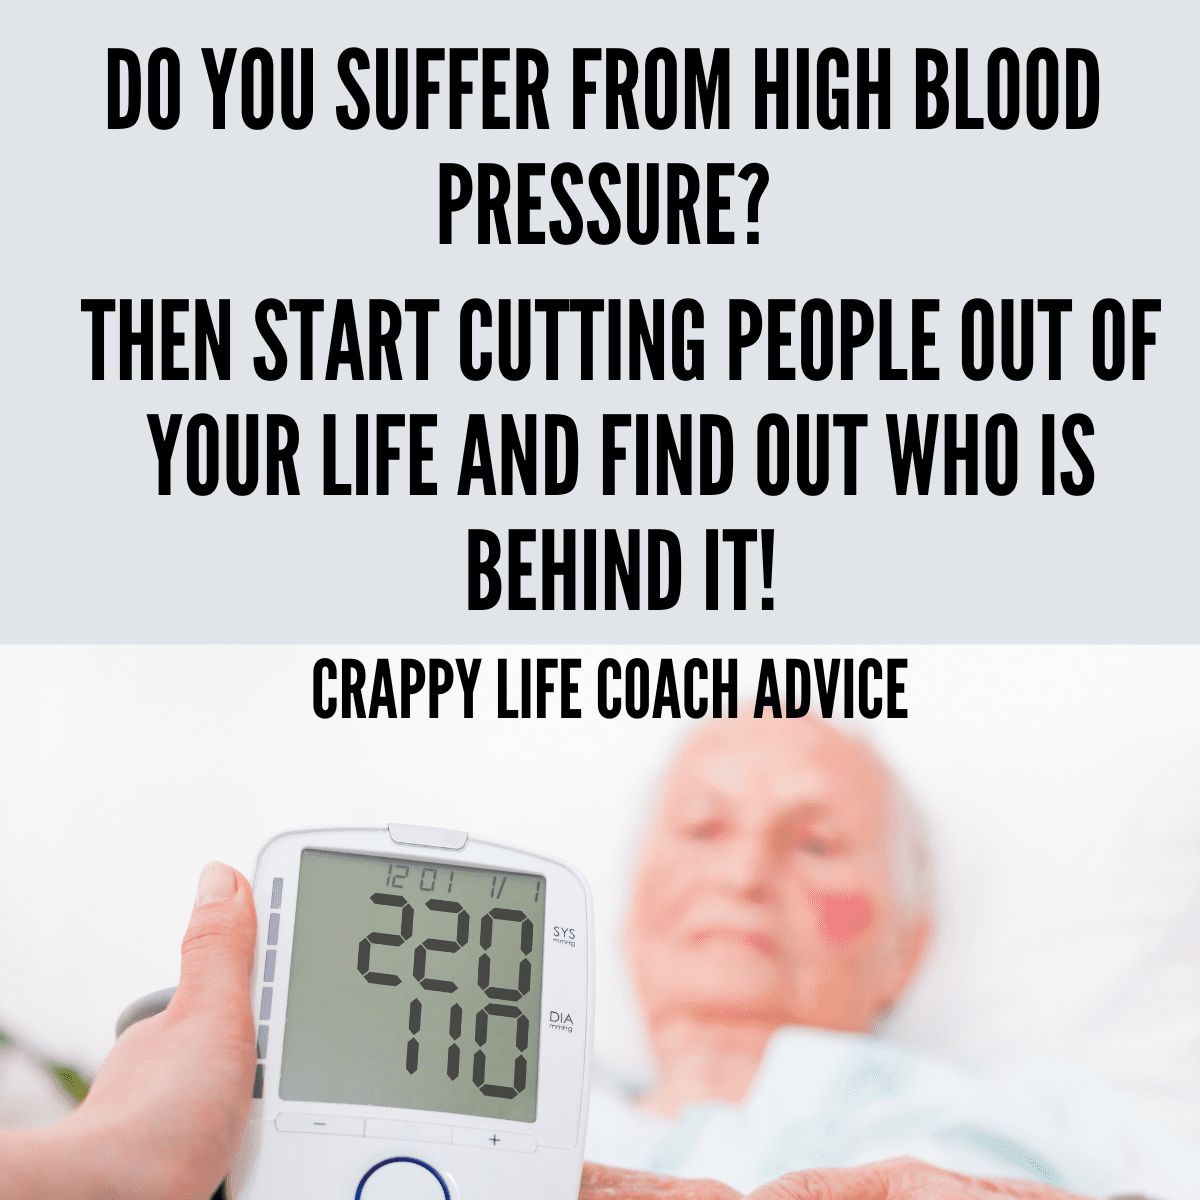 Do you suffer from high blood pressure?